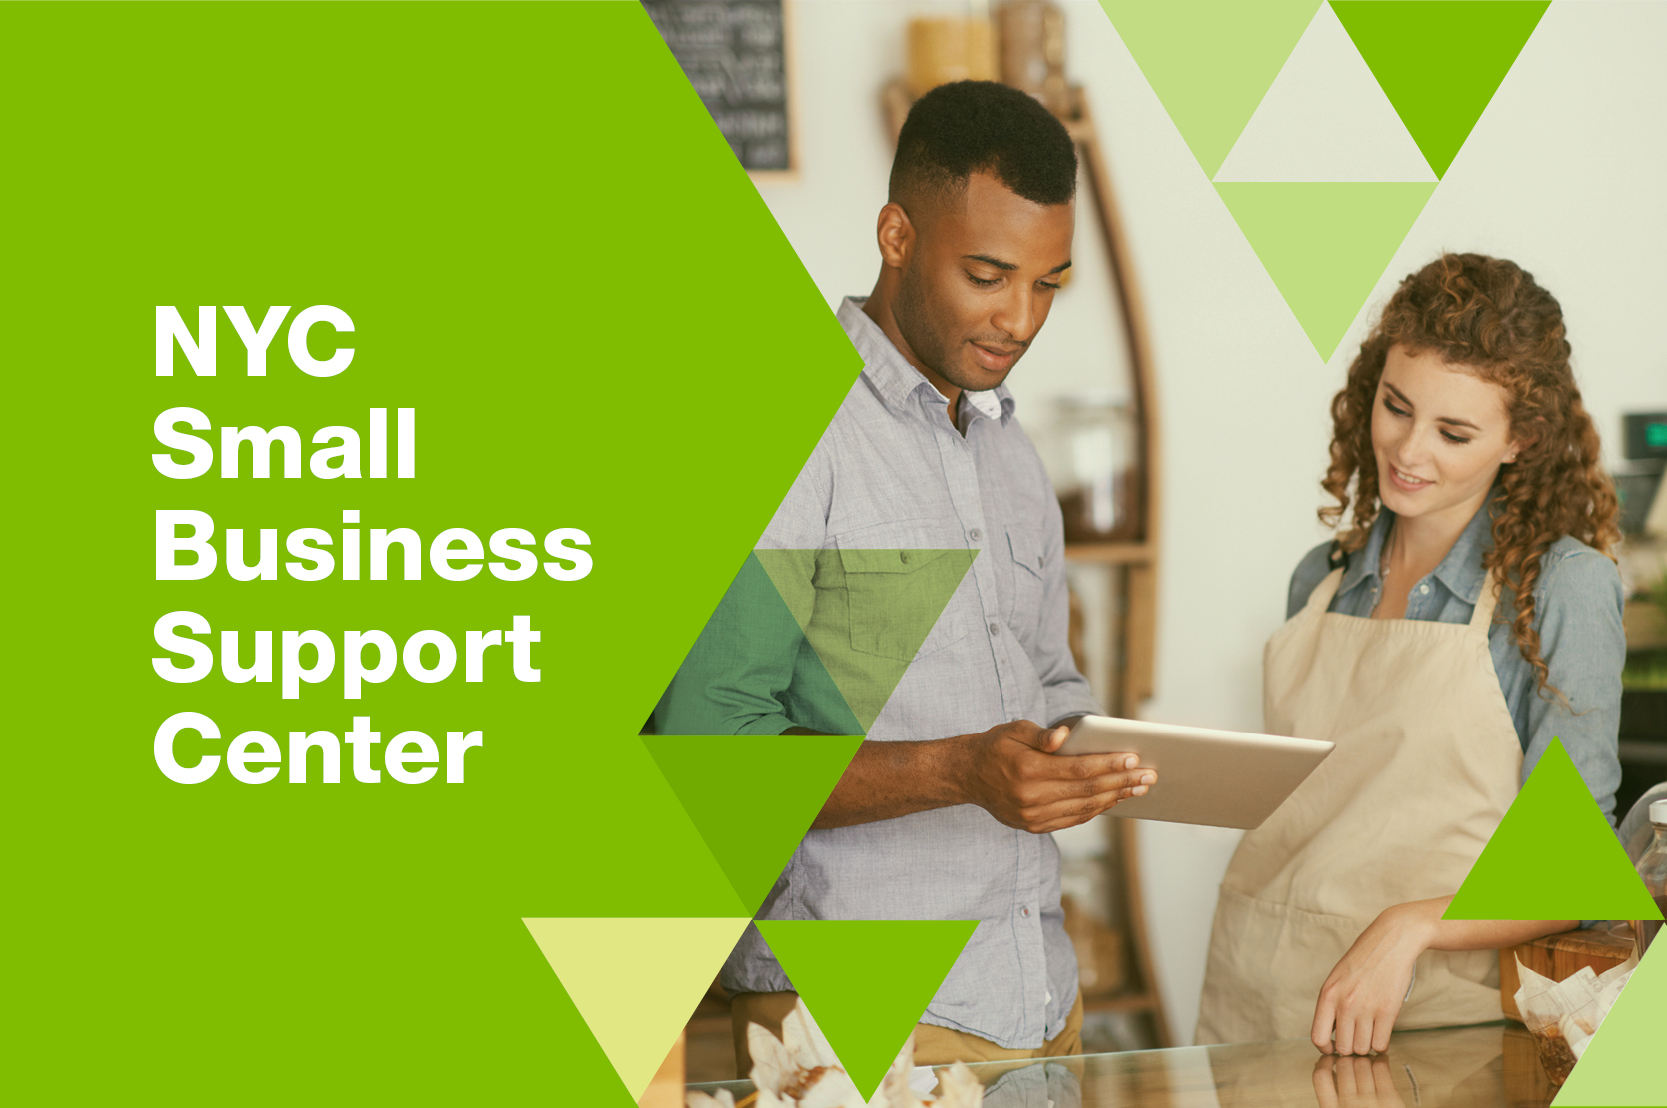 The words NYC Small Business Support Center are on the left on a green background and on the right there is a man and a woman in a store looking at a tablet.